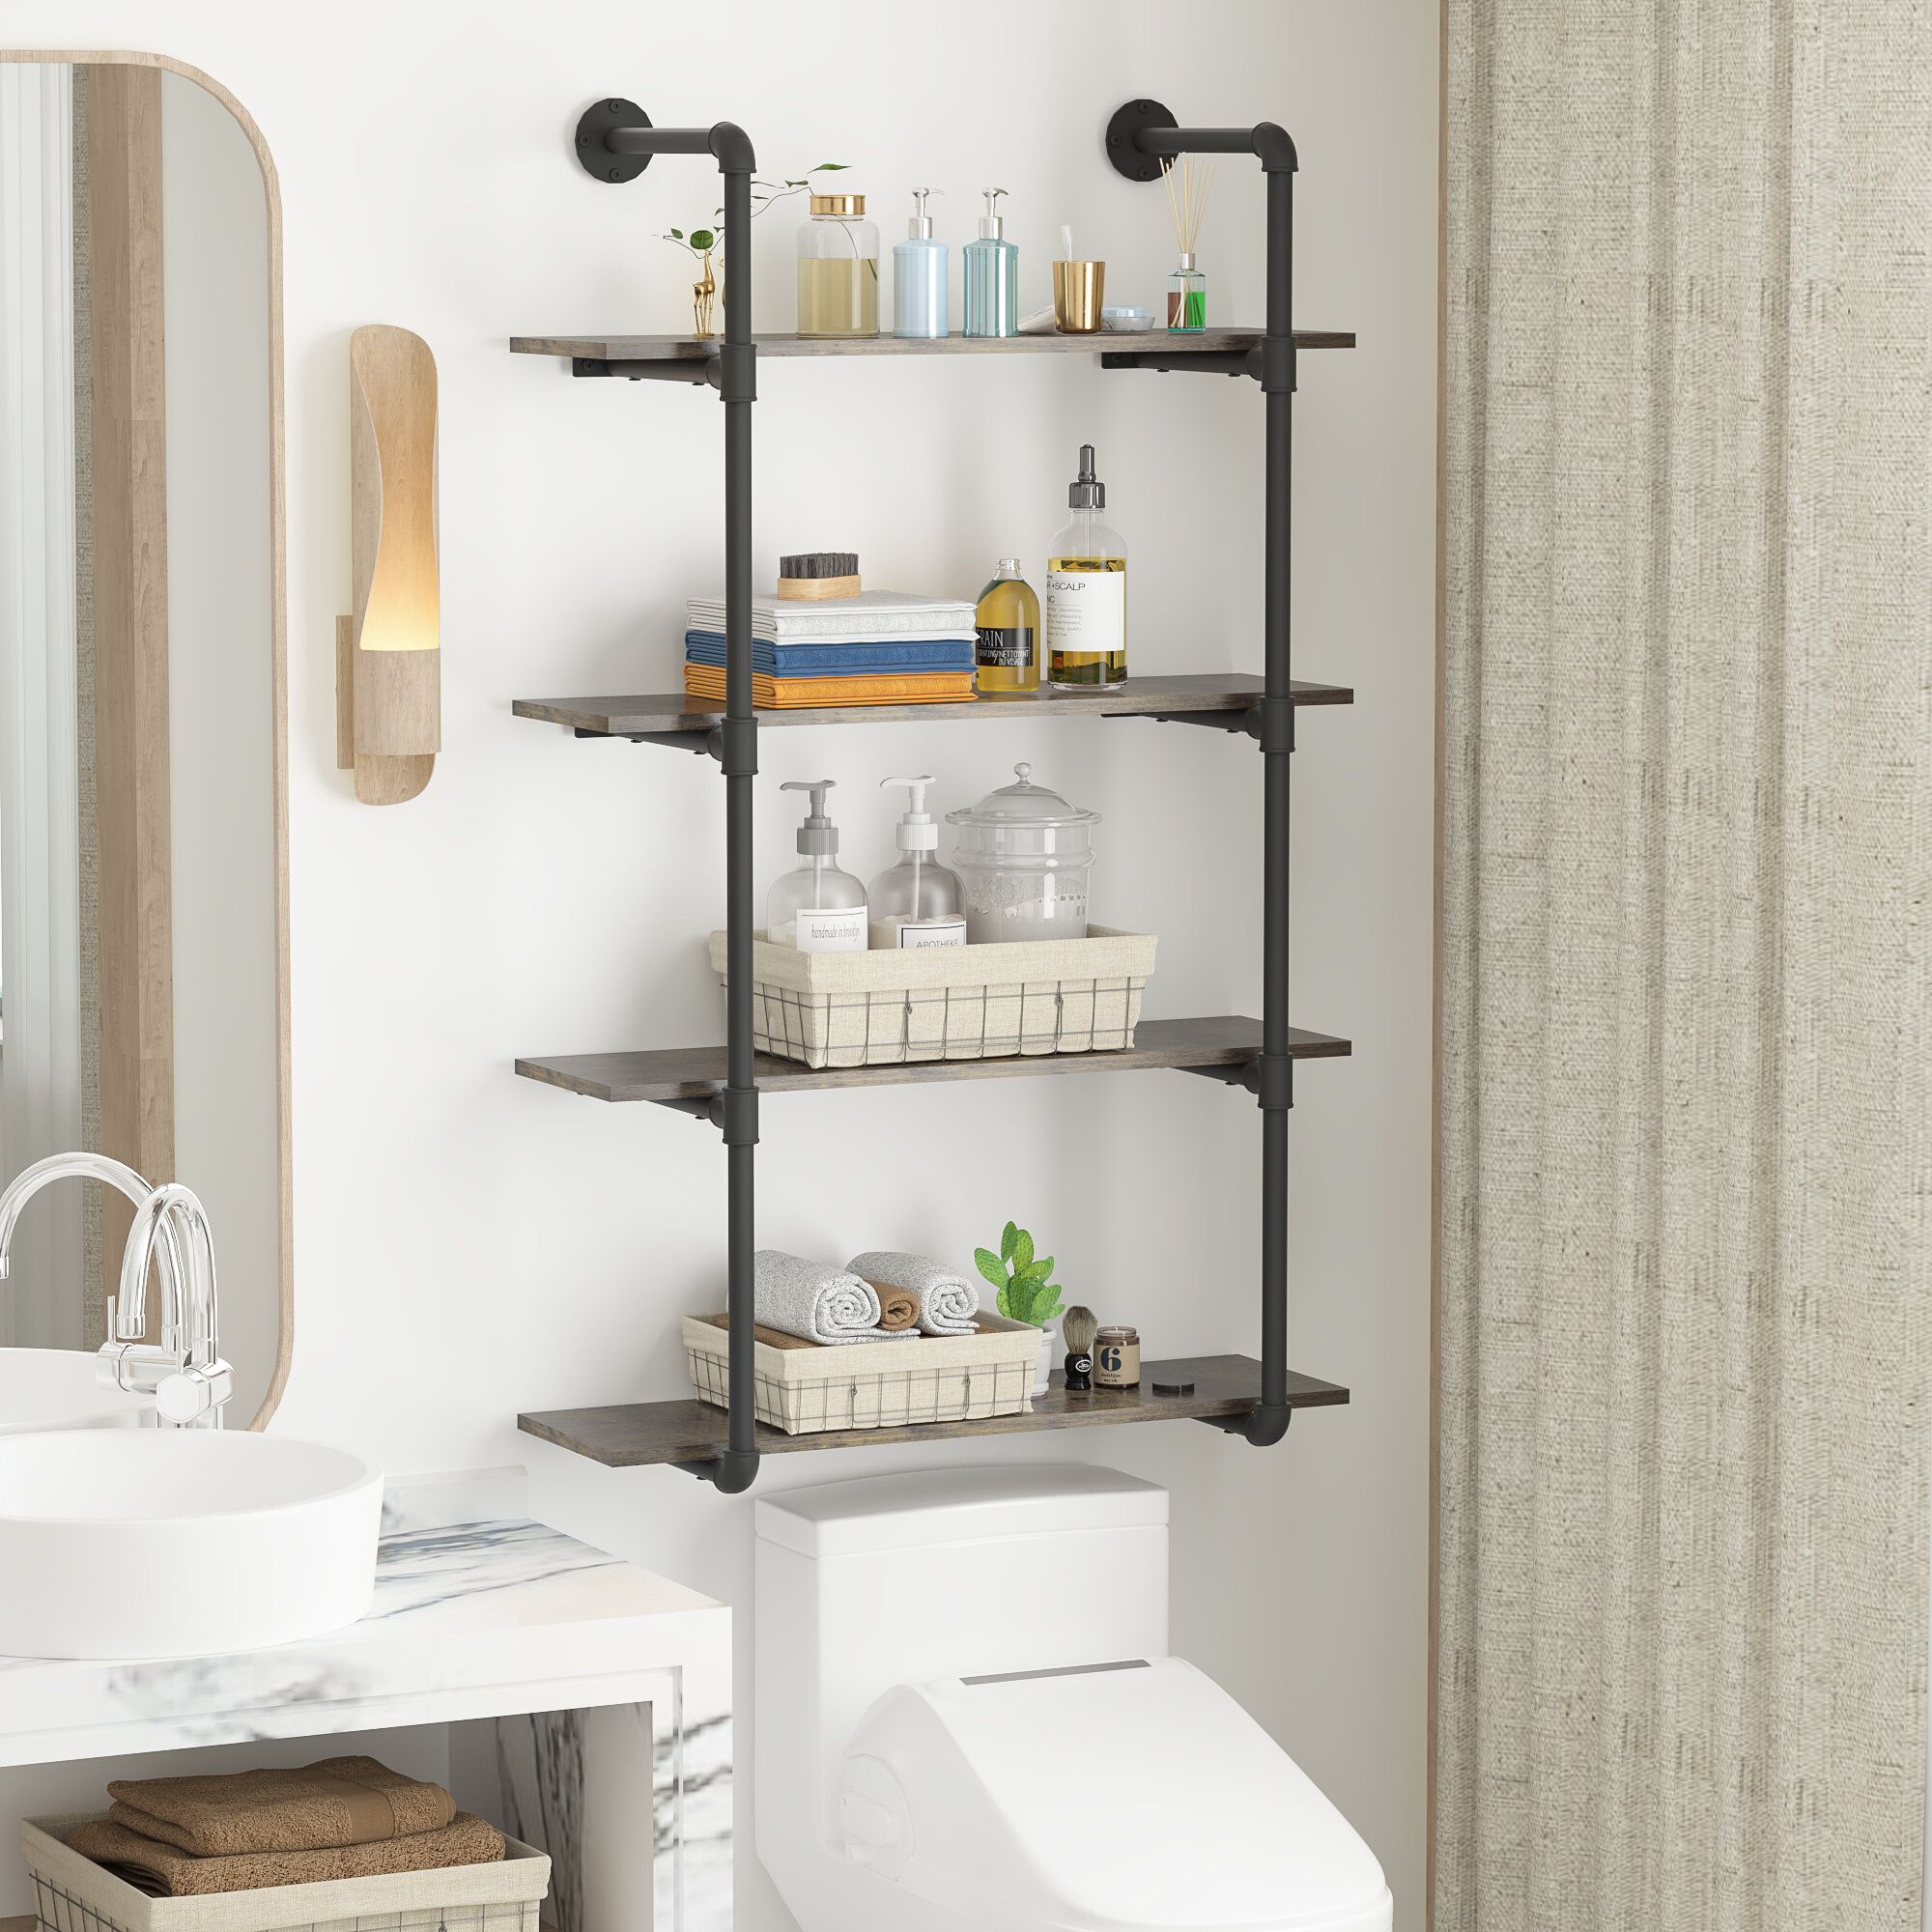 HOMCOM Industrial Pipe Style Shelf 4-Tier Wall-Mounted Utility Bookcase Floating